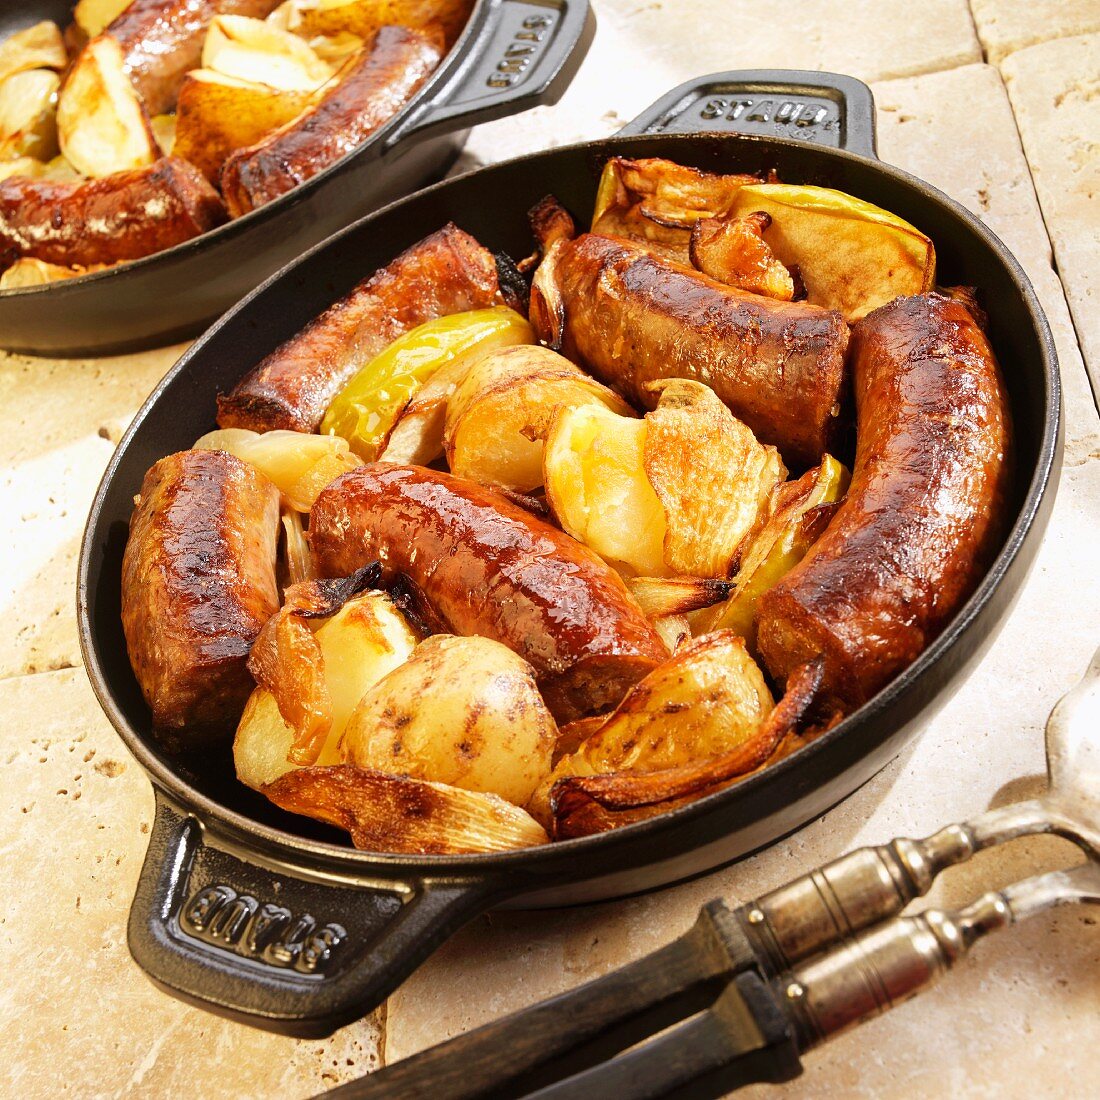 Swiss Pork Sausage, Apples and Onions Roasted in a Cast Iron Pan